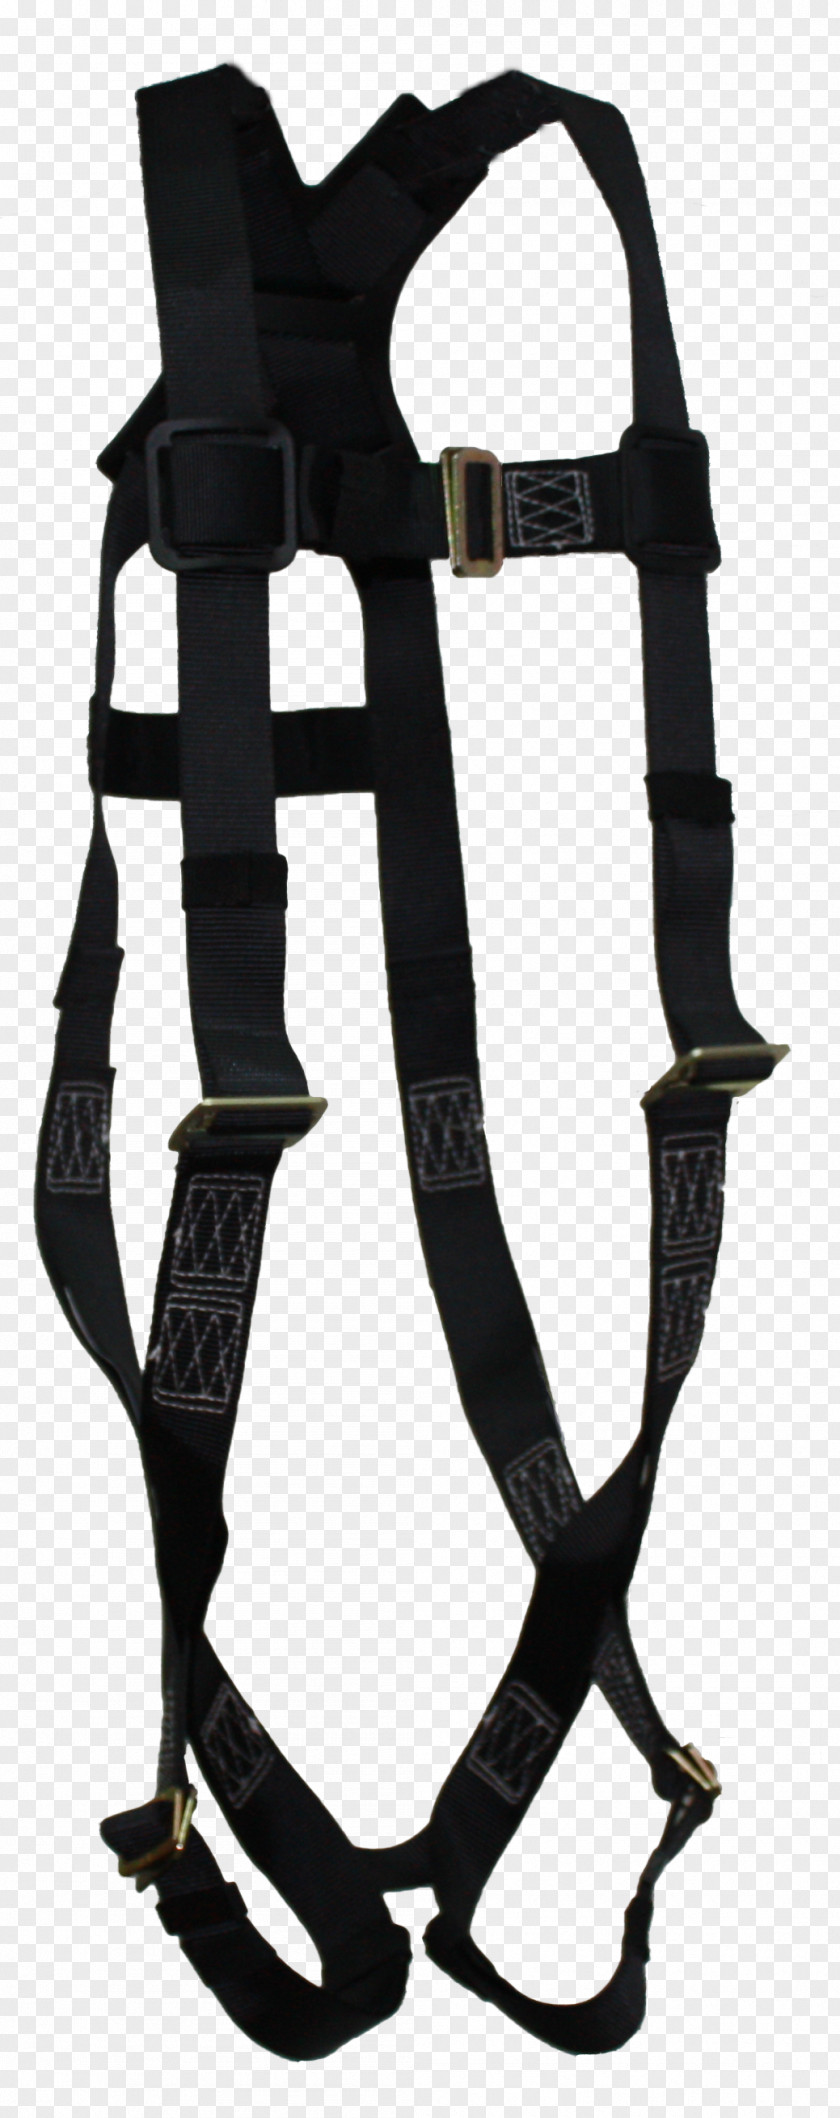 Harness Climbing Harnesses Safety Personal Protective Equipment D-ring PNG